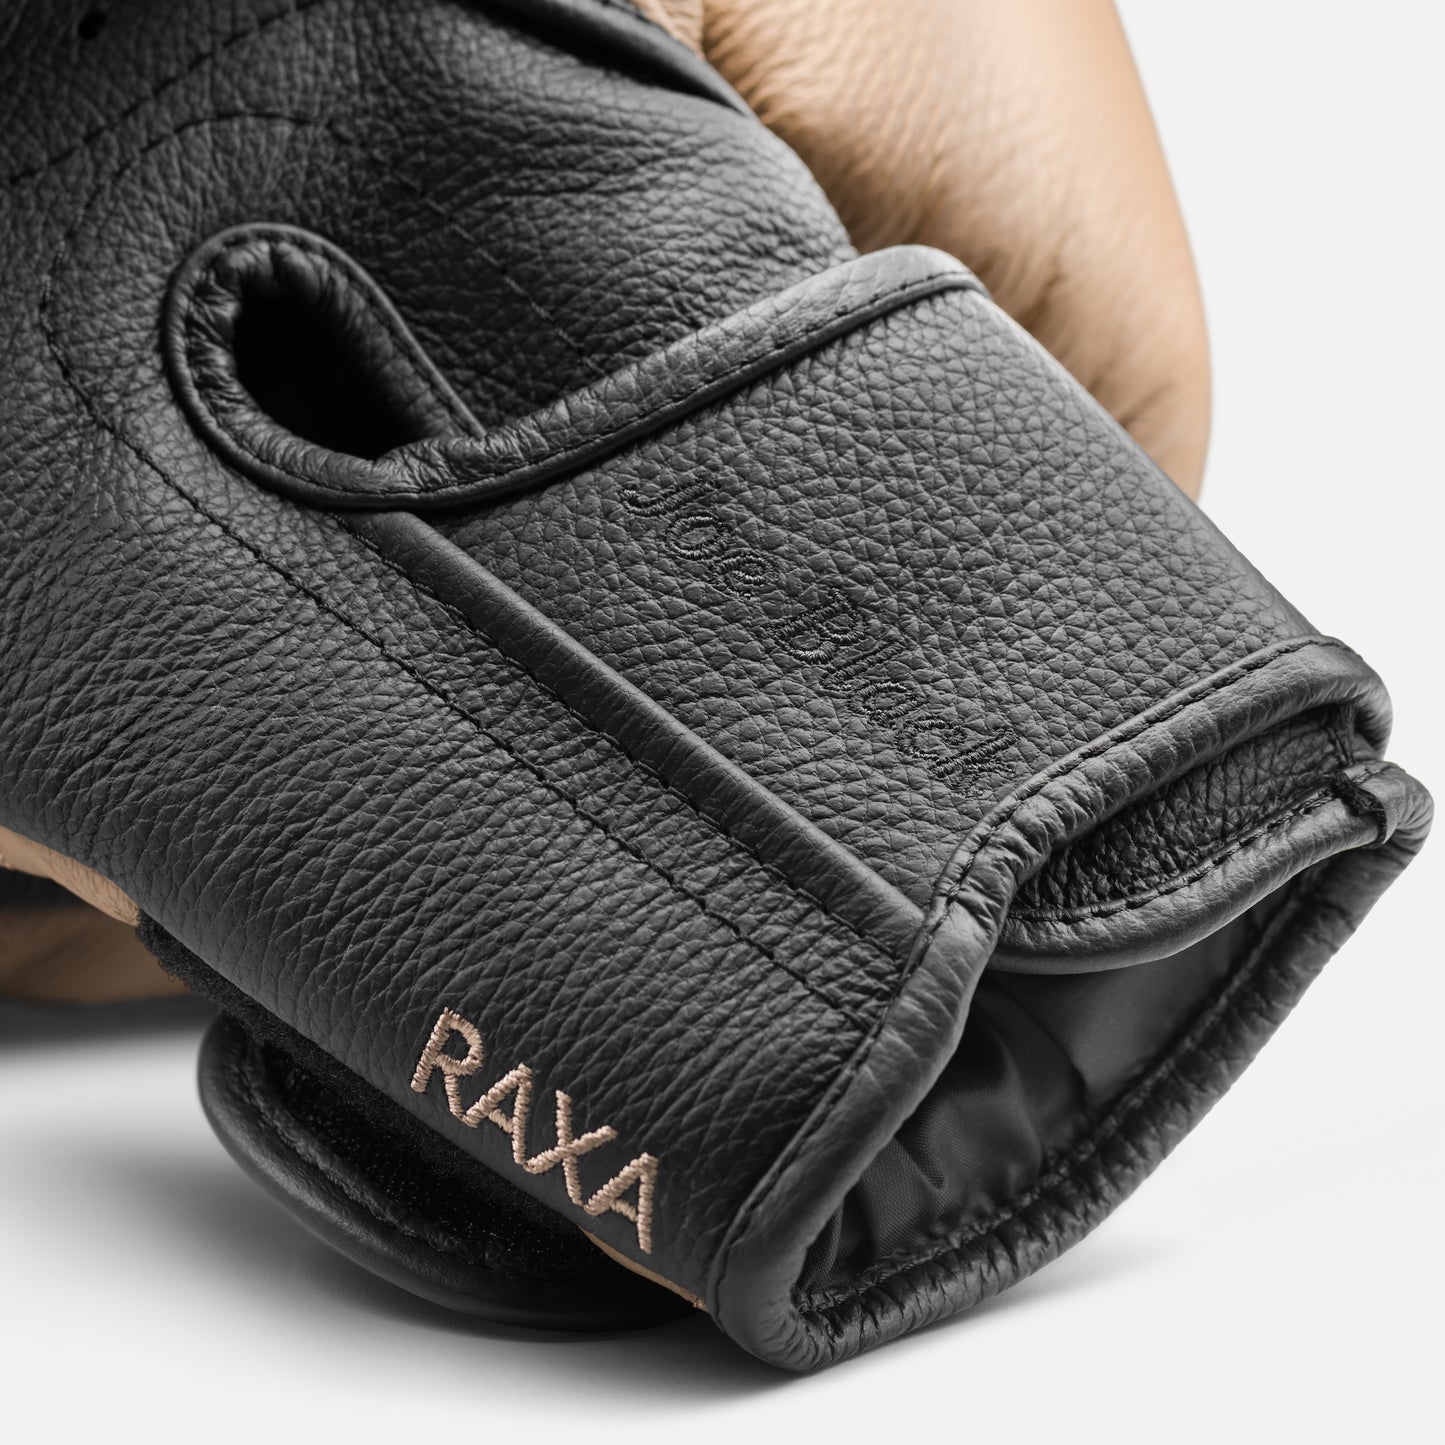 Luxury Boxing Gloves. PENT RAXA Leather Gloves. Customizable boxing gloves. Cycling Bears. 